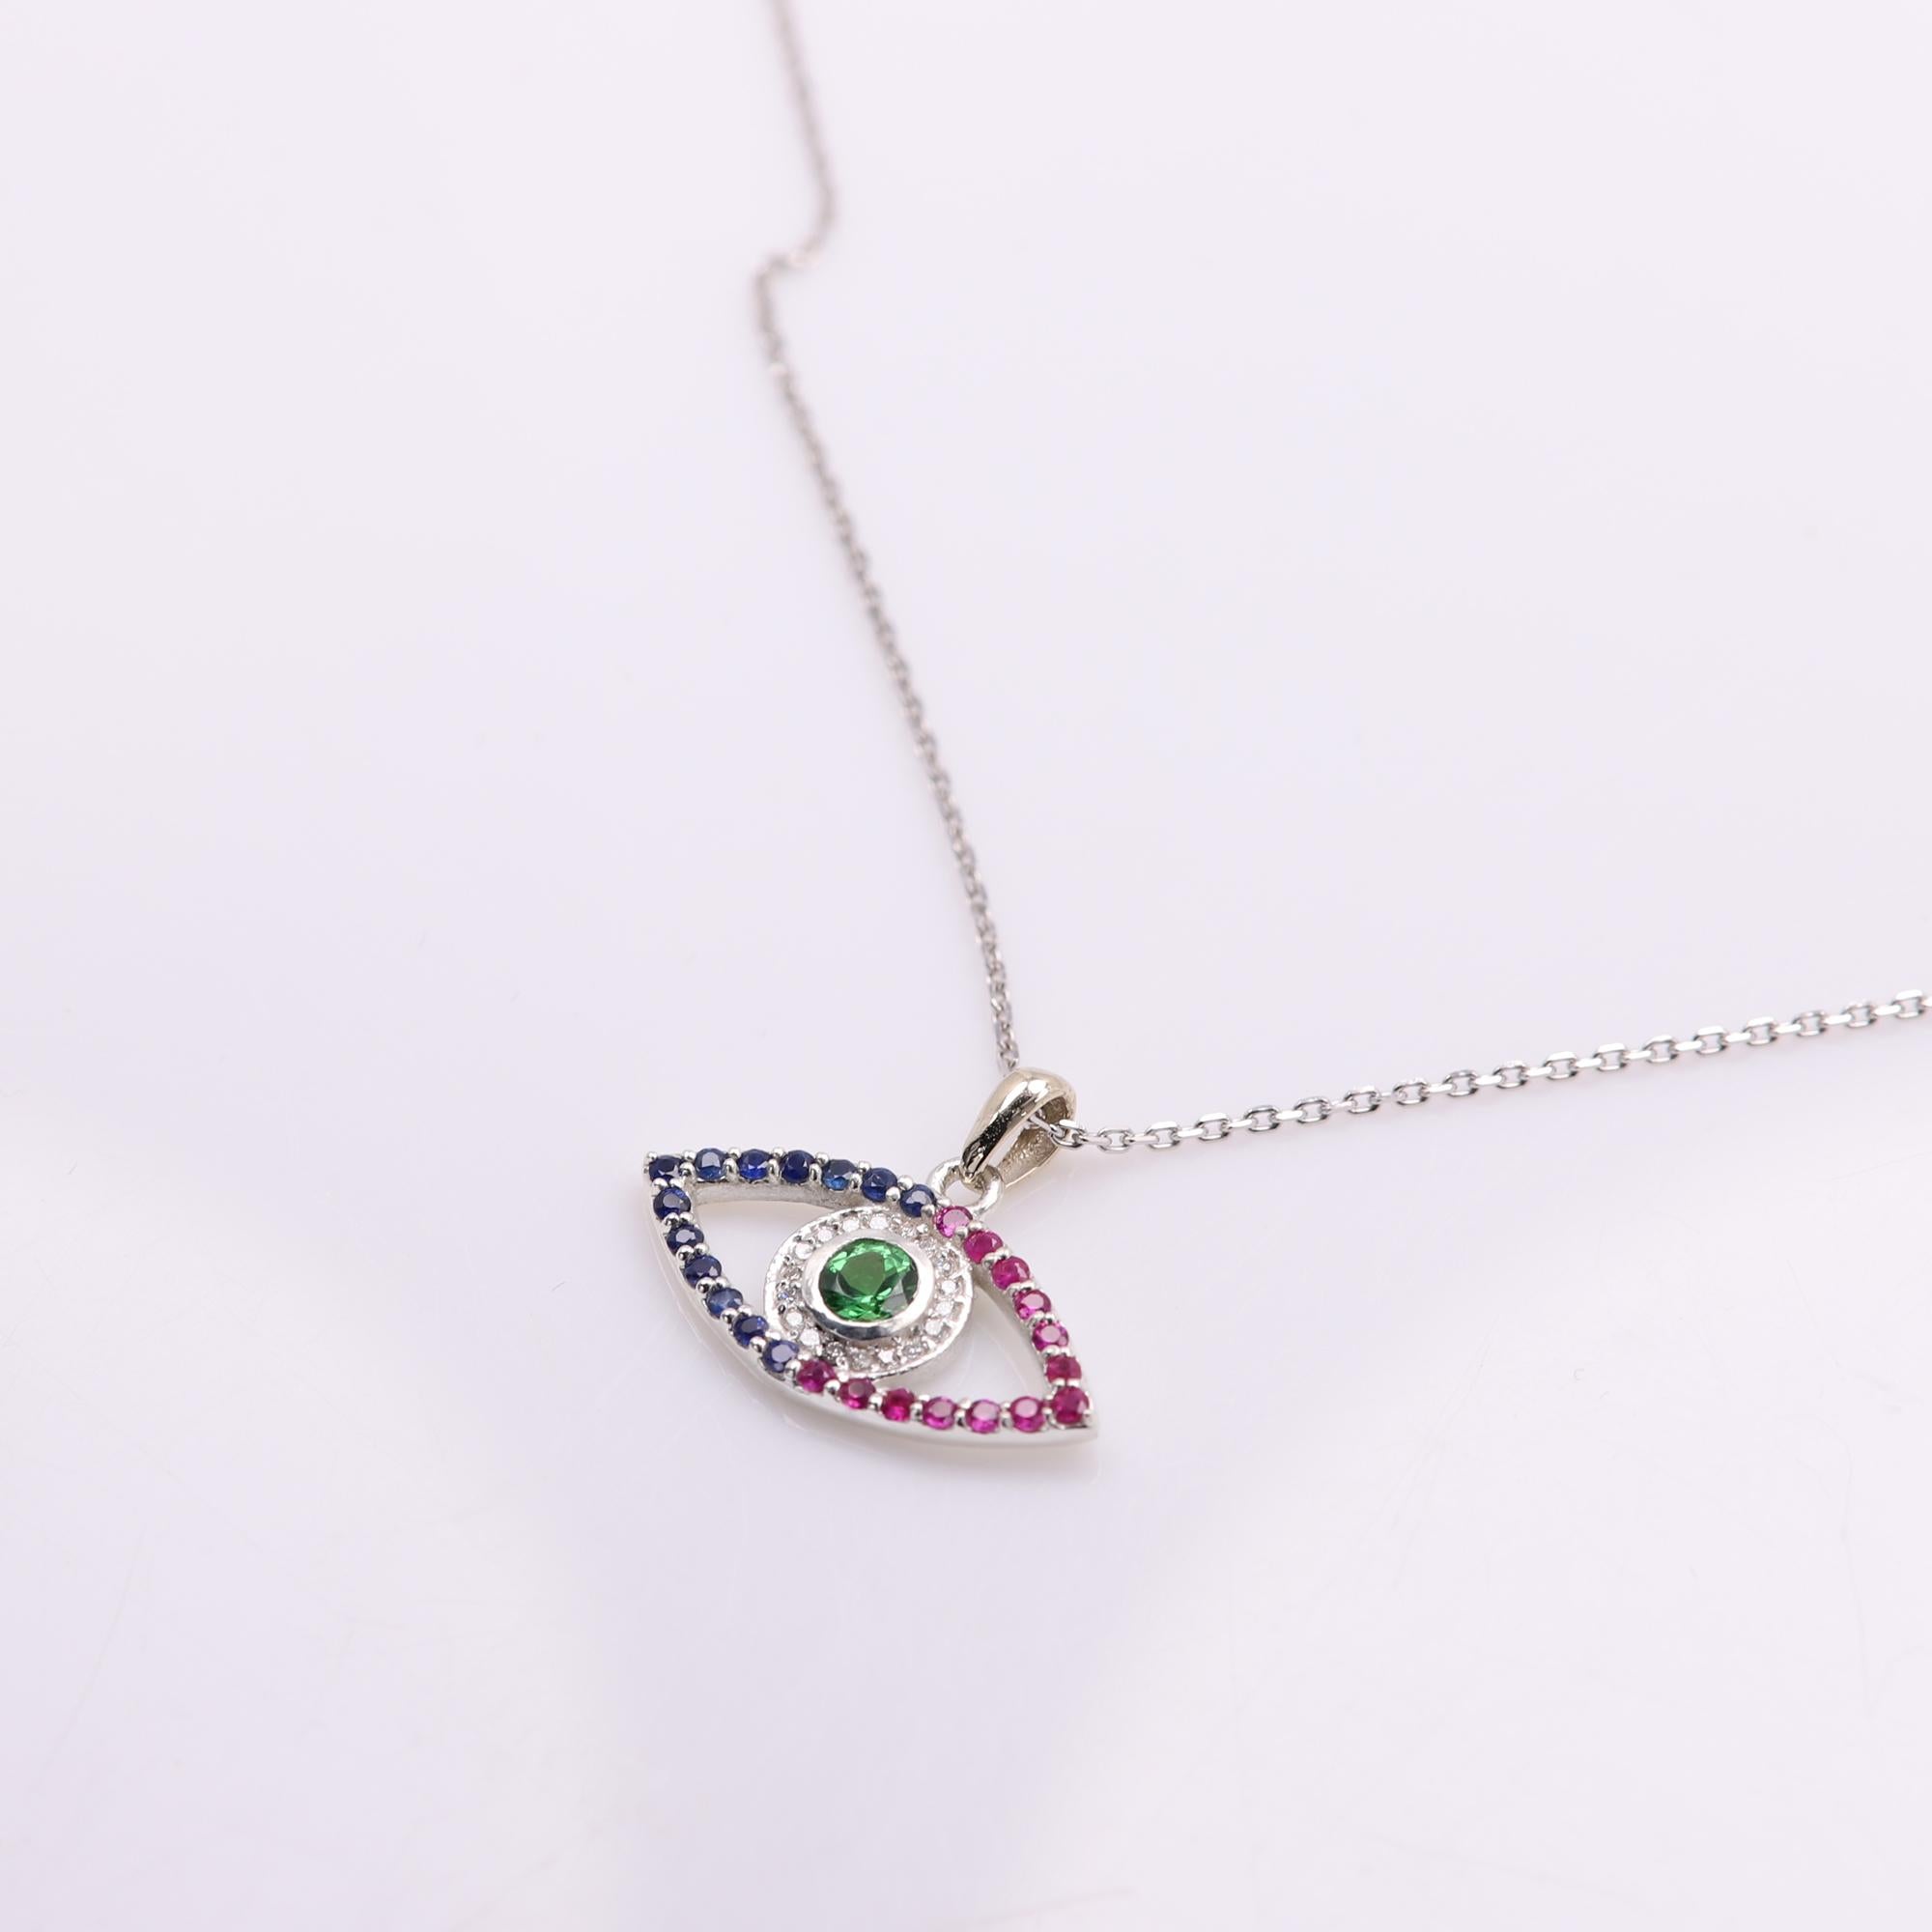 Brilliant Colors of mixed natural Gemstones
made in USA Evil Eye pendant 
14k White Gold 2.0 grams (weight without the chain)
Small Diamonds approx. 0.10 ct
Green Tsavorite center approx. 0.40 carat
Small natural Diamonds approx.0.10 carat G-VS
Reb